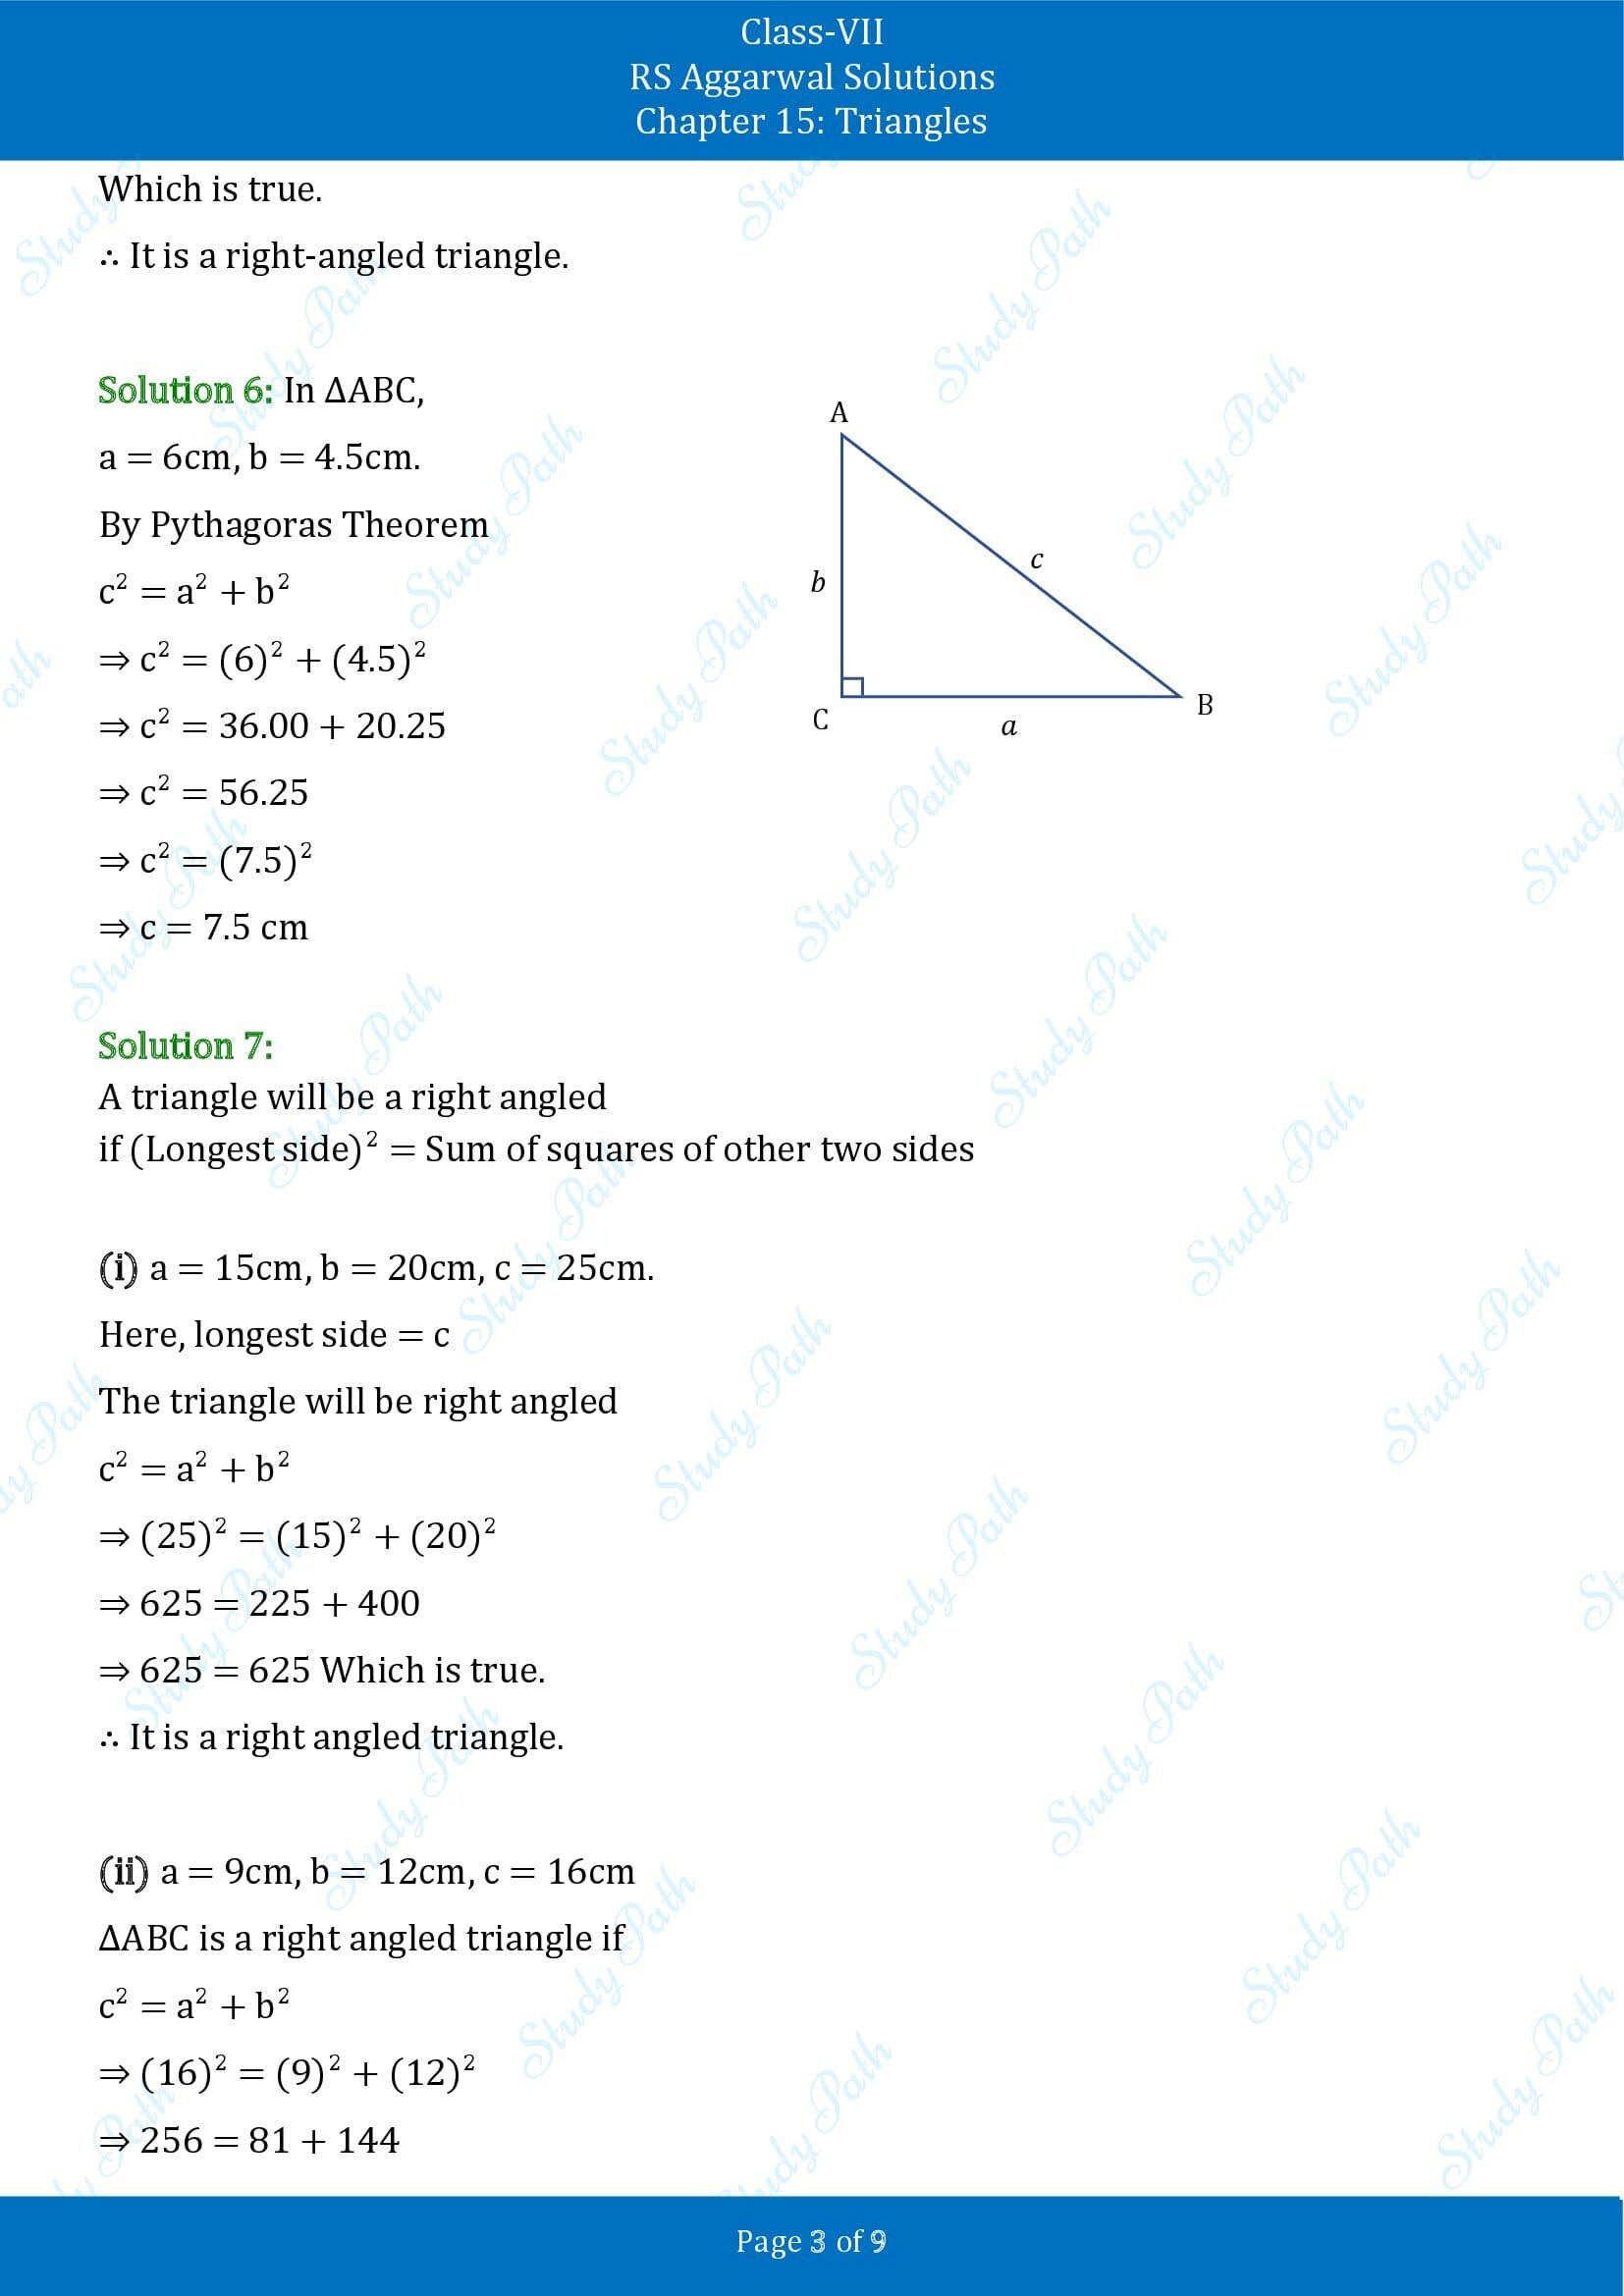 RS Aggarwal Solutions Class 7 Chapter 15 Triangles Exercise 15D 00003